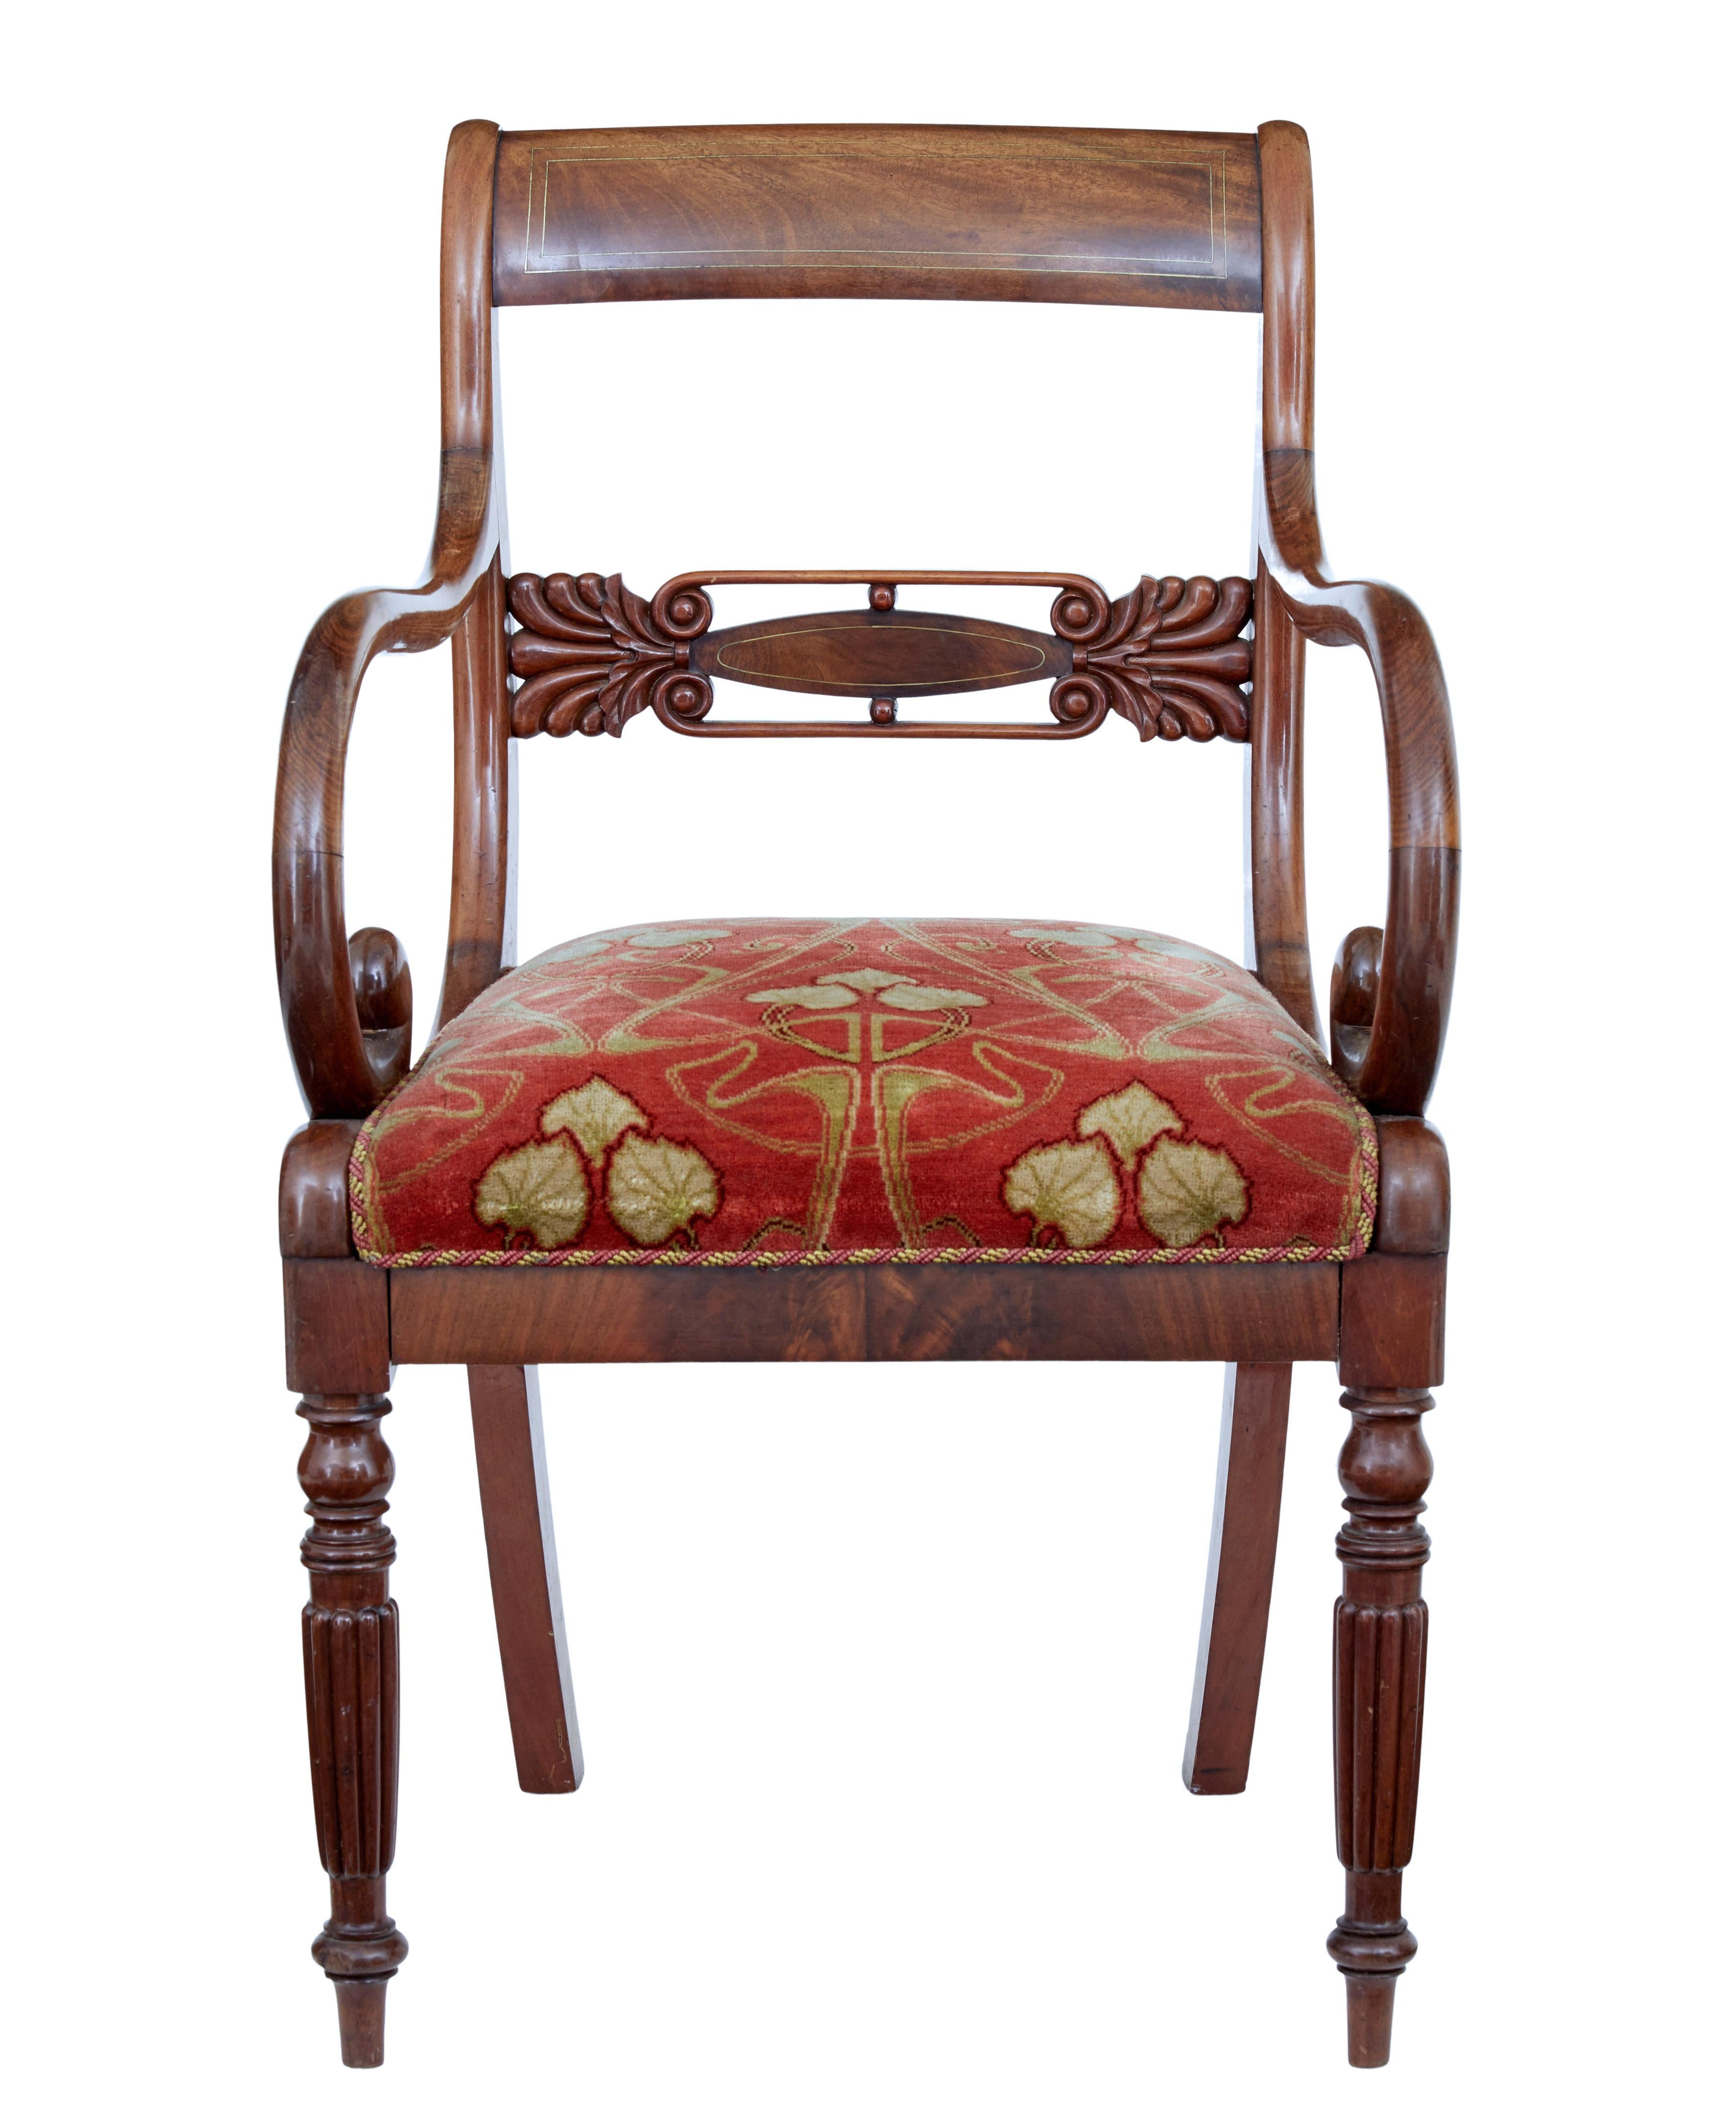 Fine quality set of 4 Danish armchairs, circa 1860.

Rare set of Danish armchairs in the English Regency taste. Fine brass stringing to the backrest complements the bold scrolling arms. Pierced carved detail support to the lower backrest.

Later